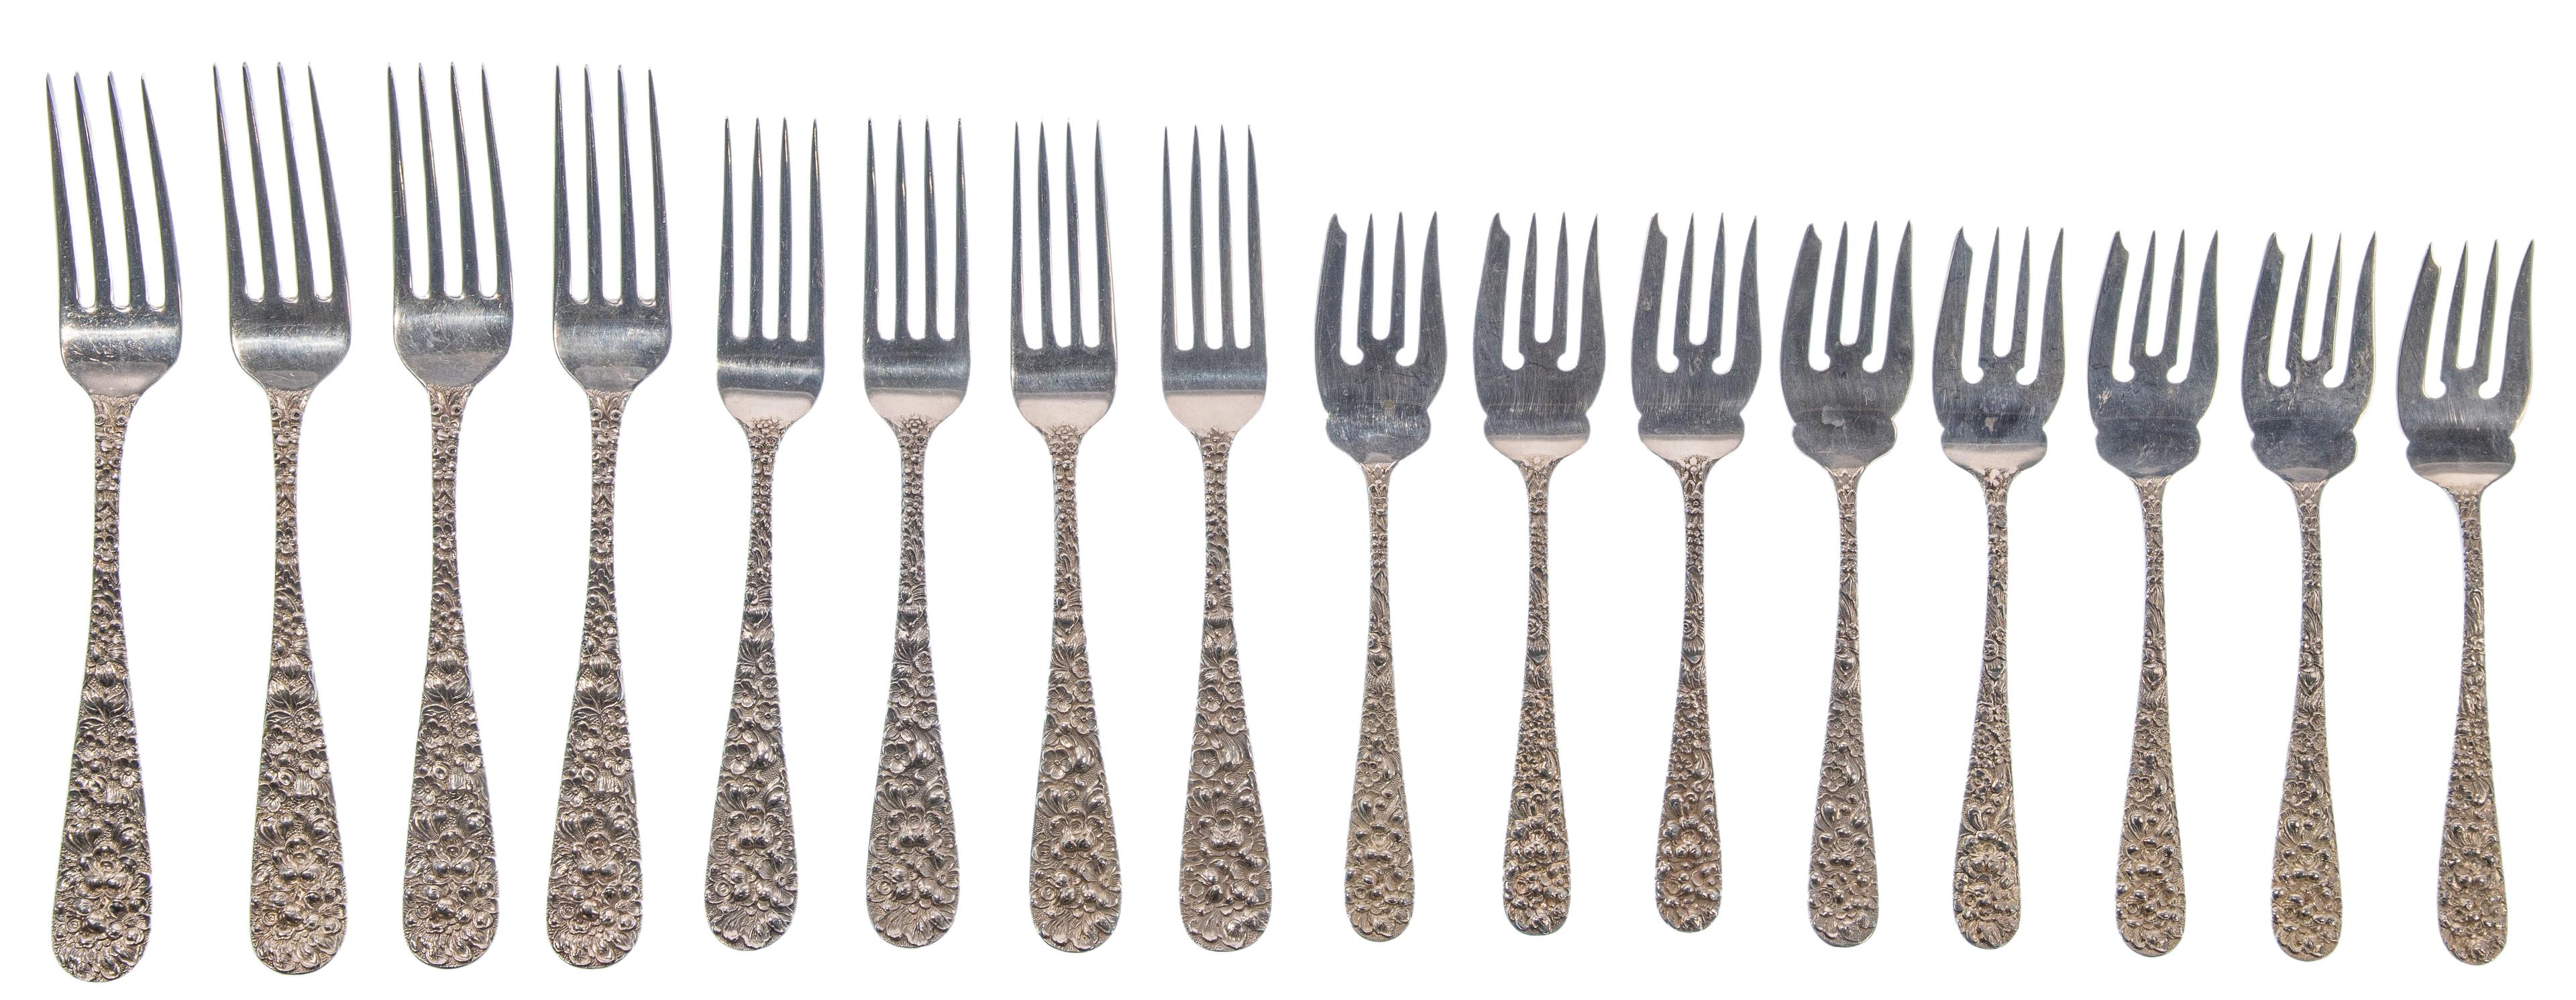 Stieff Repousse Sterling Silver Flatware